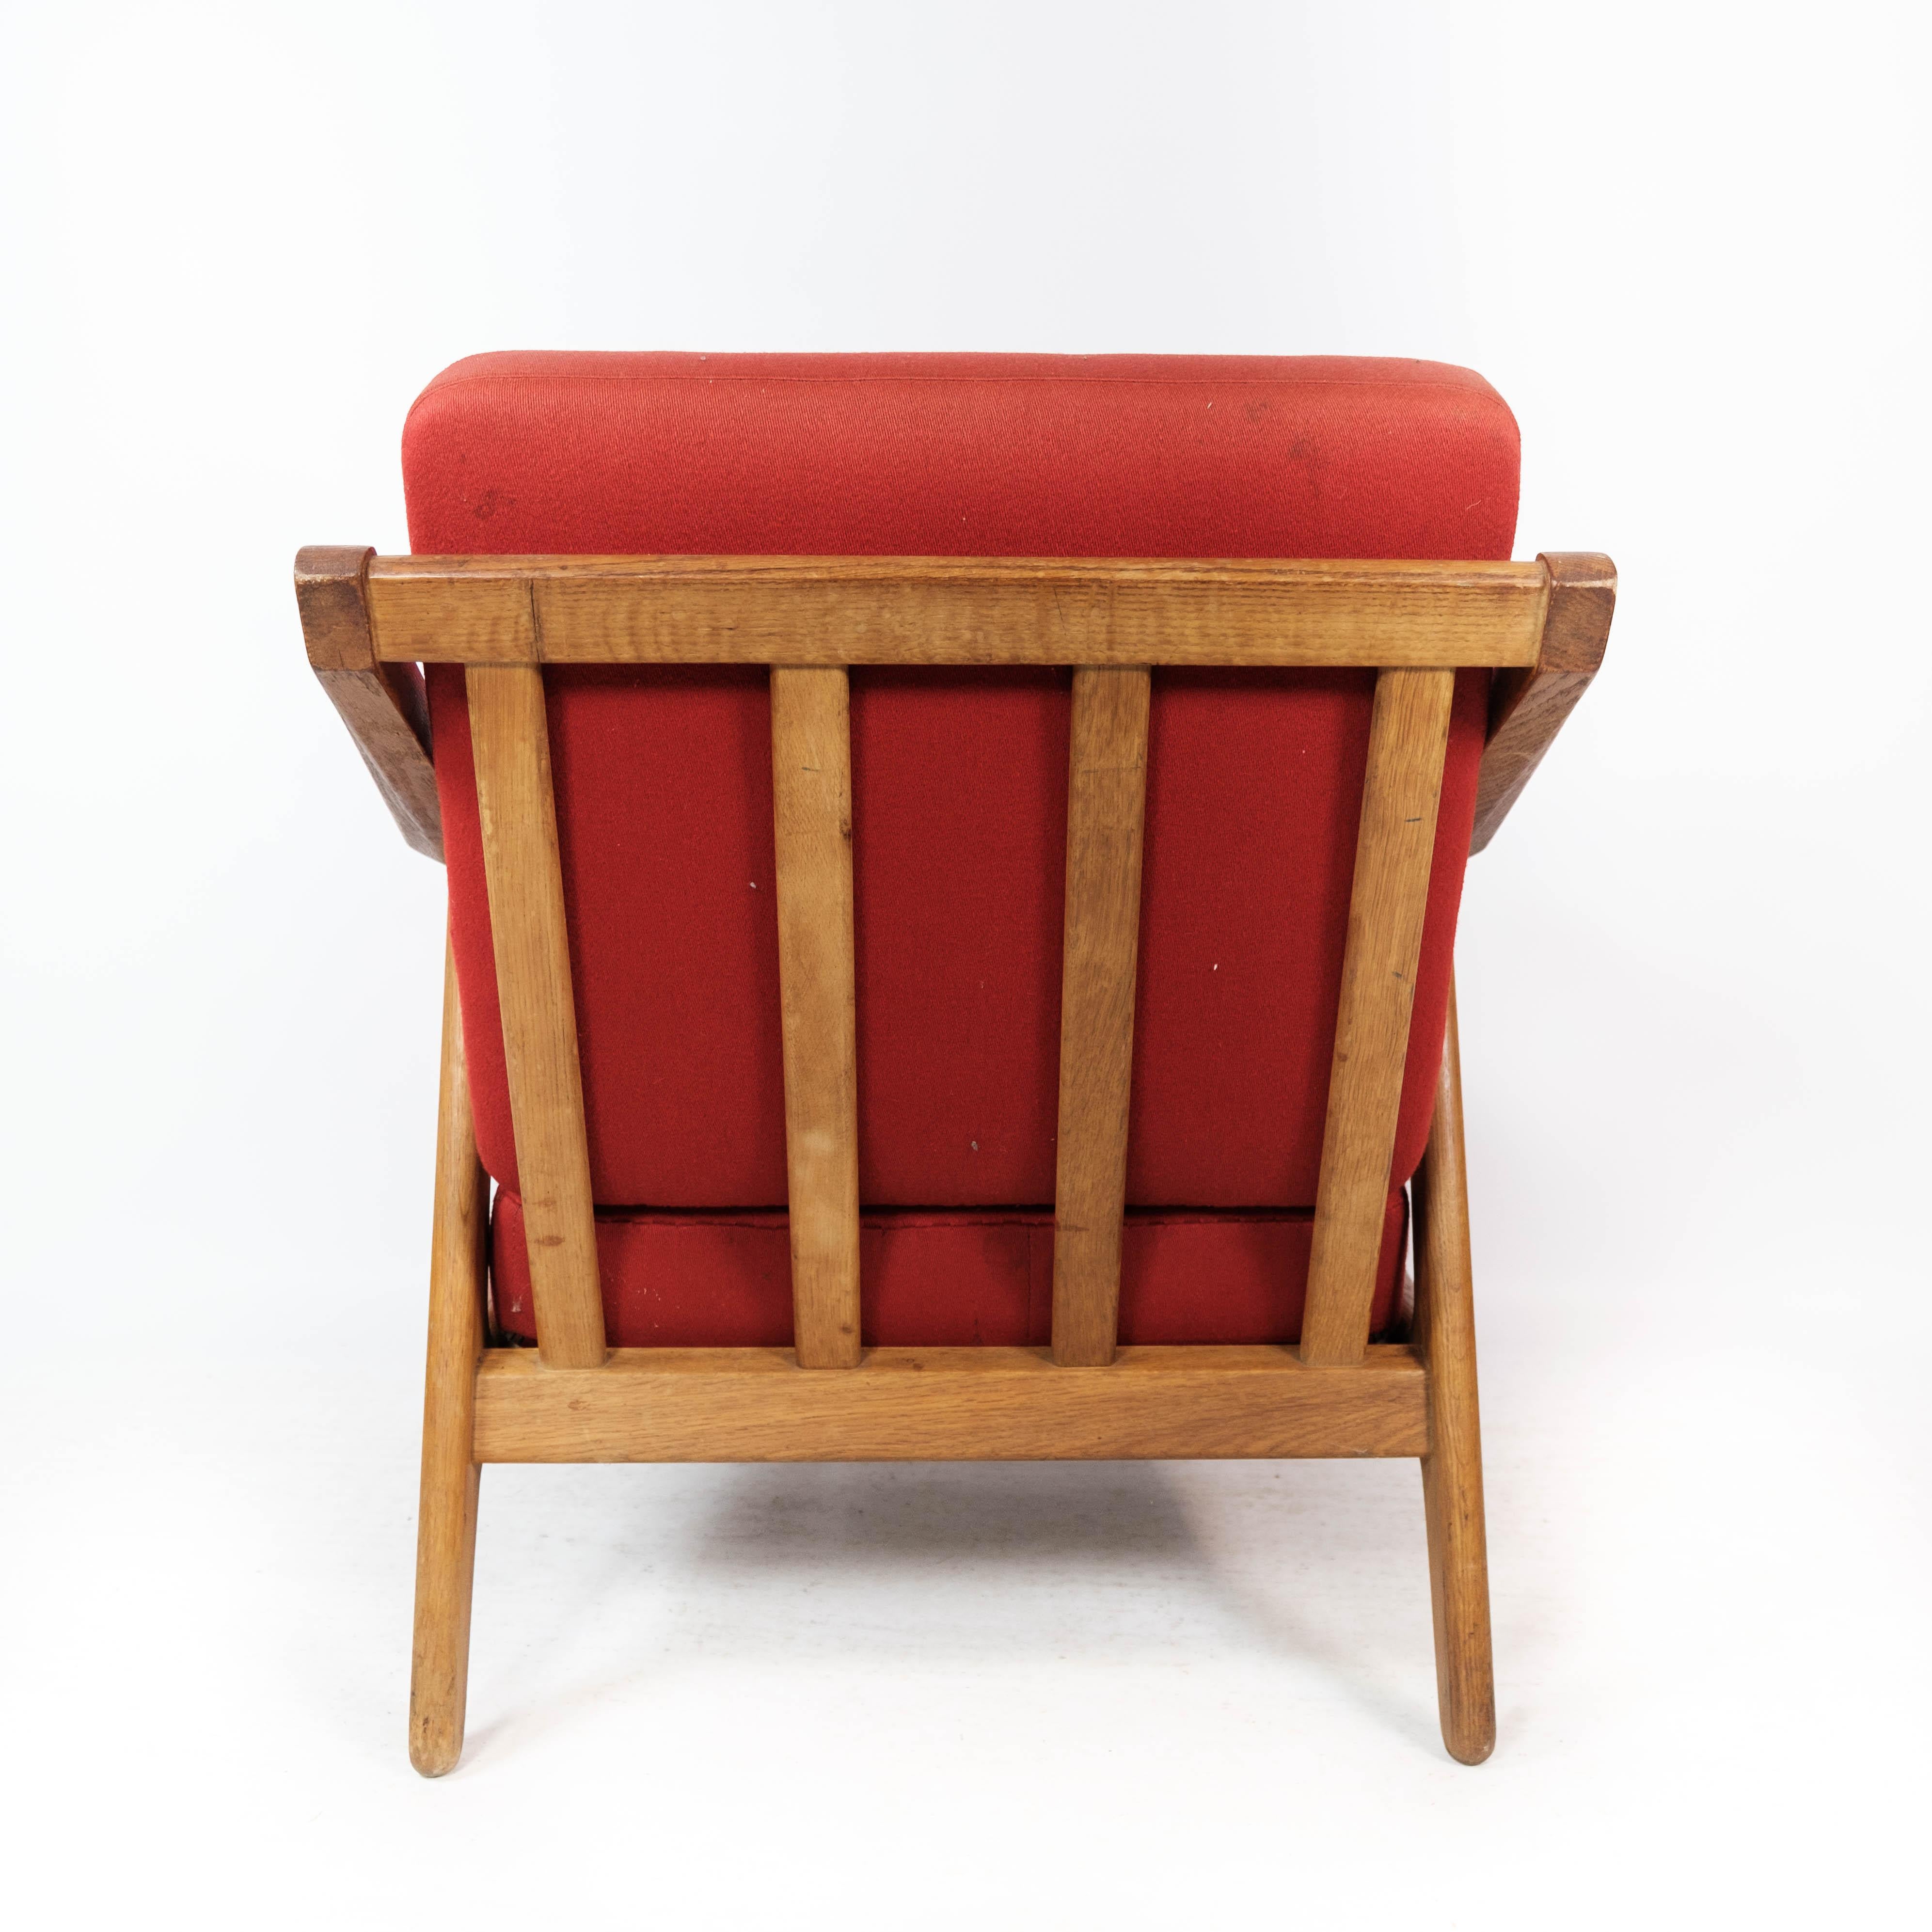 Mid-20th Century Armchair in Oak and Upholstered with Red Fabric, by H. Brockmann Petersen, 1960s For Sale